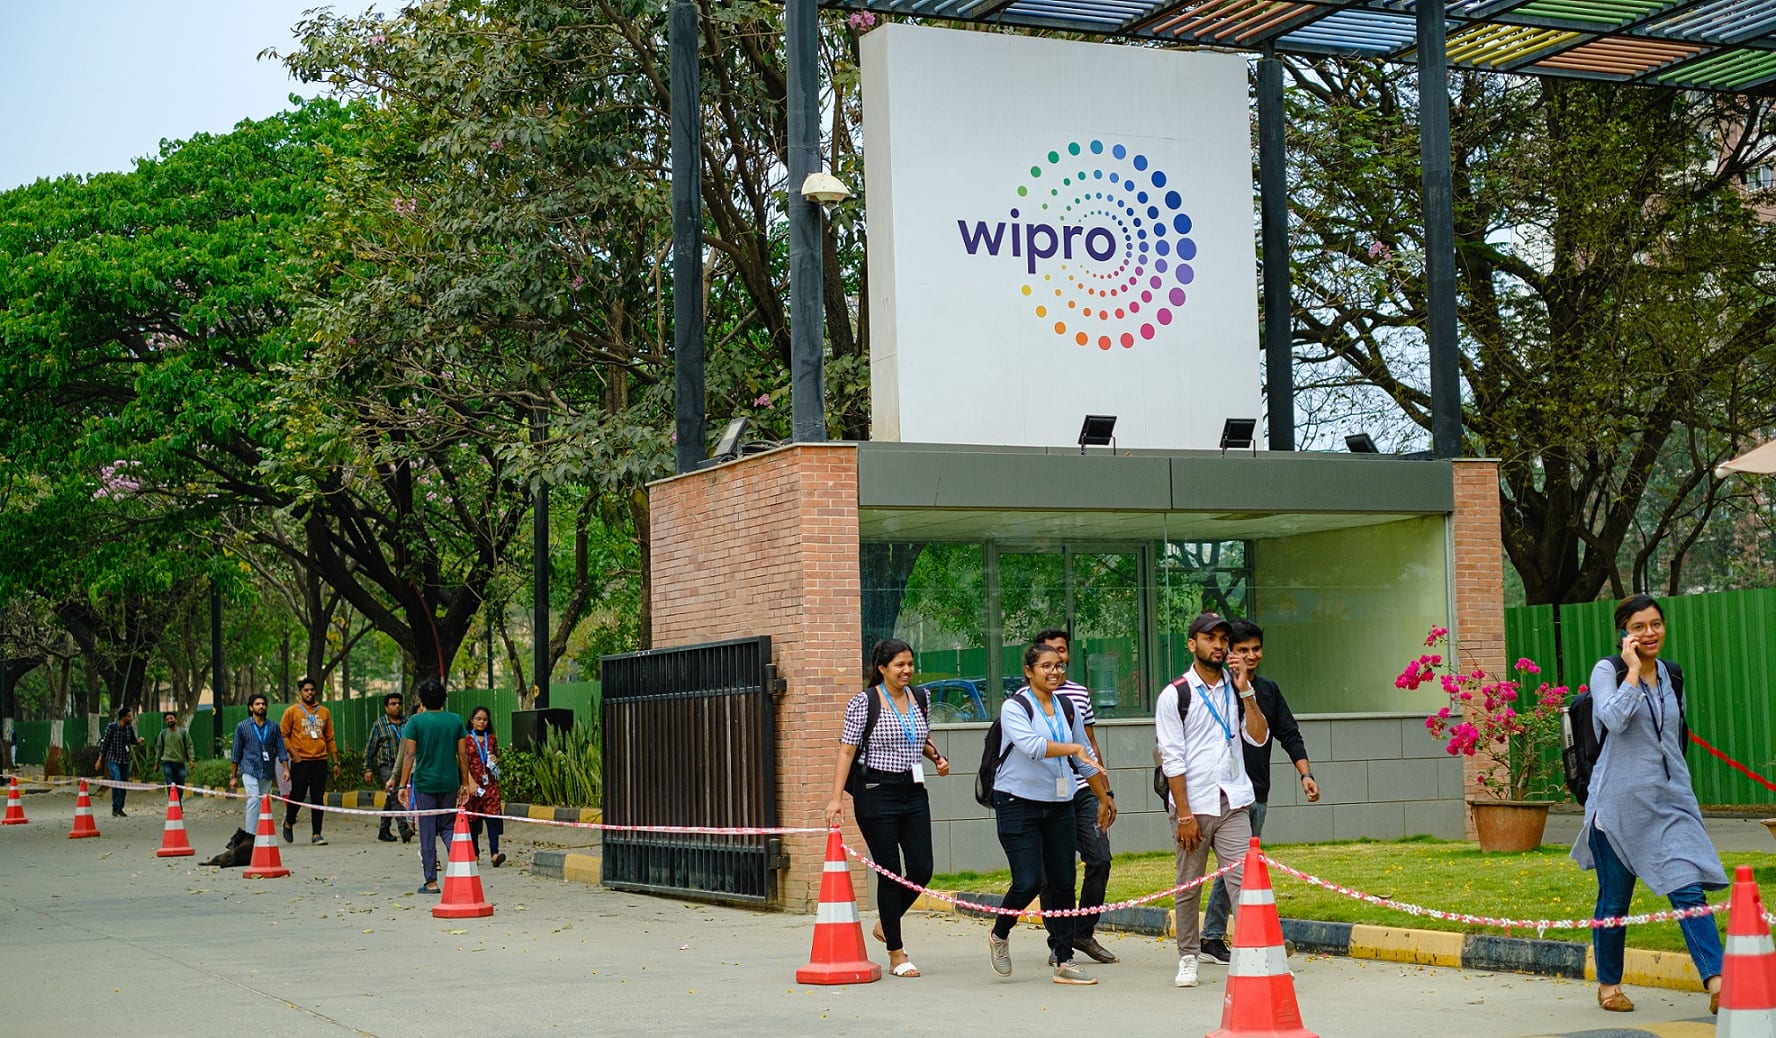 Wipro is back hiring, plans to add 10,000 - 12,000 employees in FY25